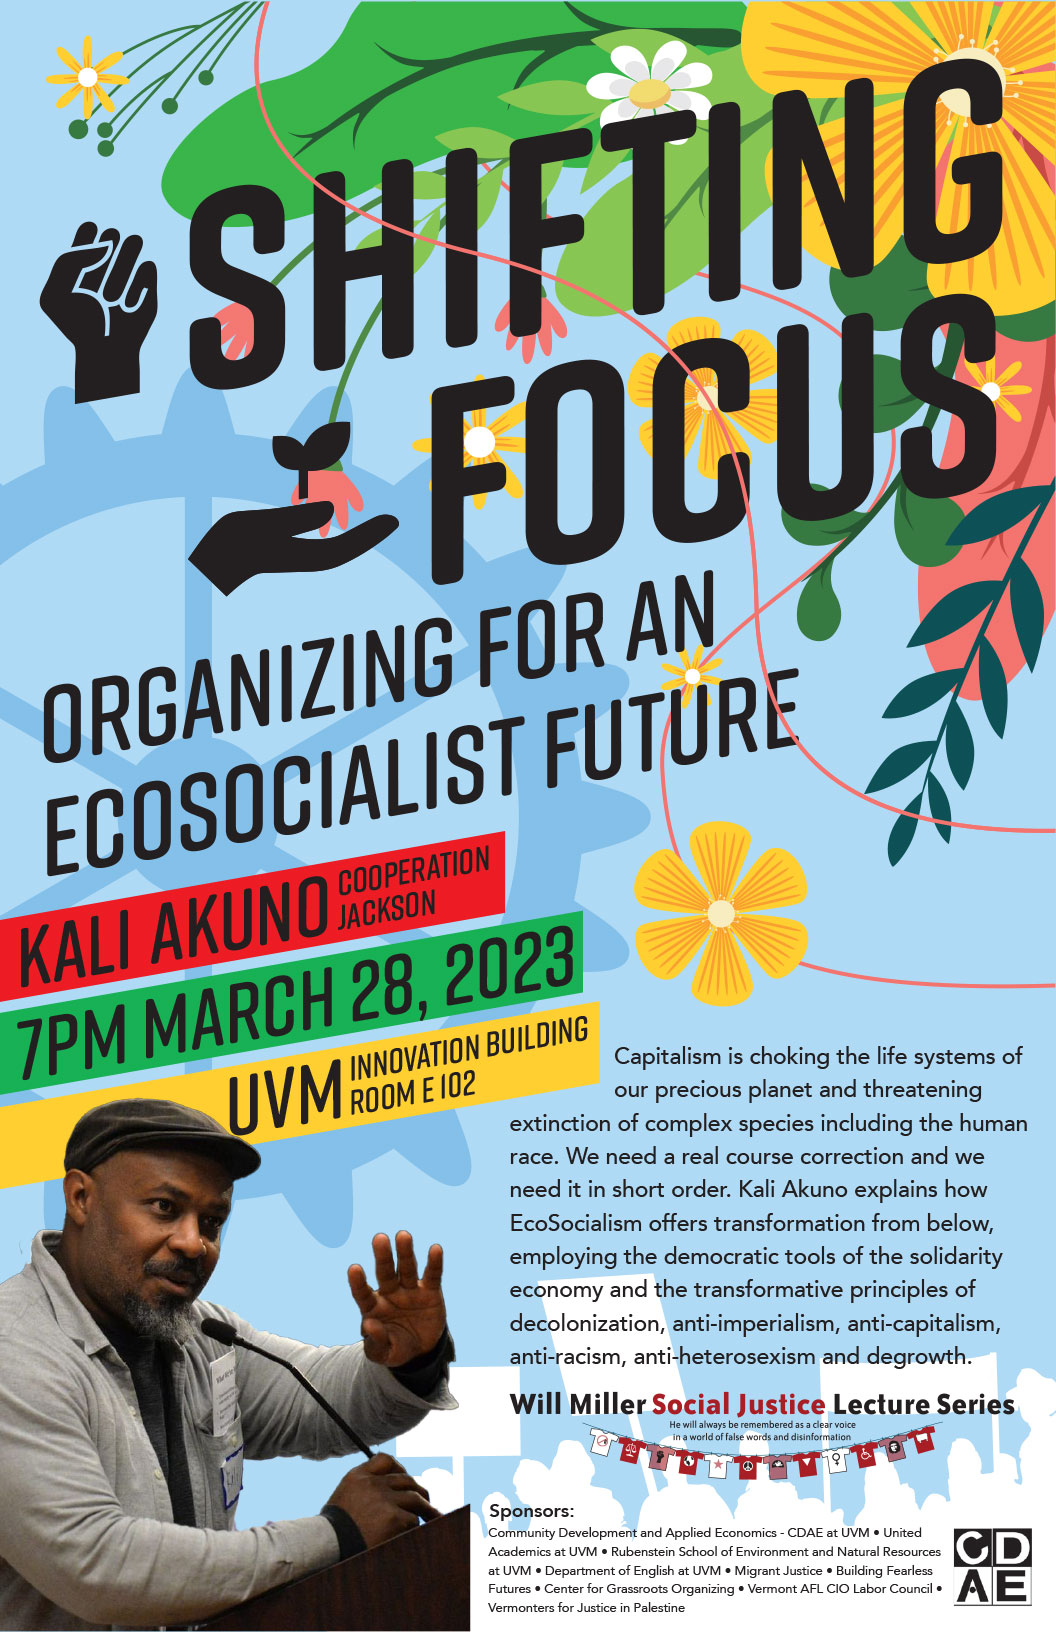 poster for March 28, 2023 event with Kali Akuno, Organizing for an Ecosocialist Future